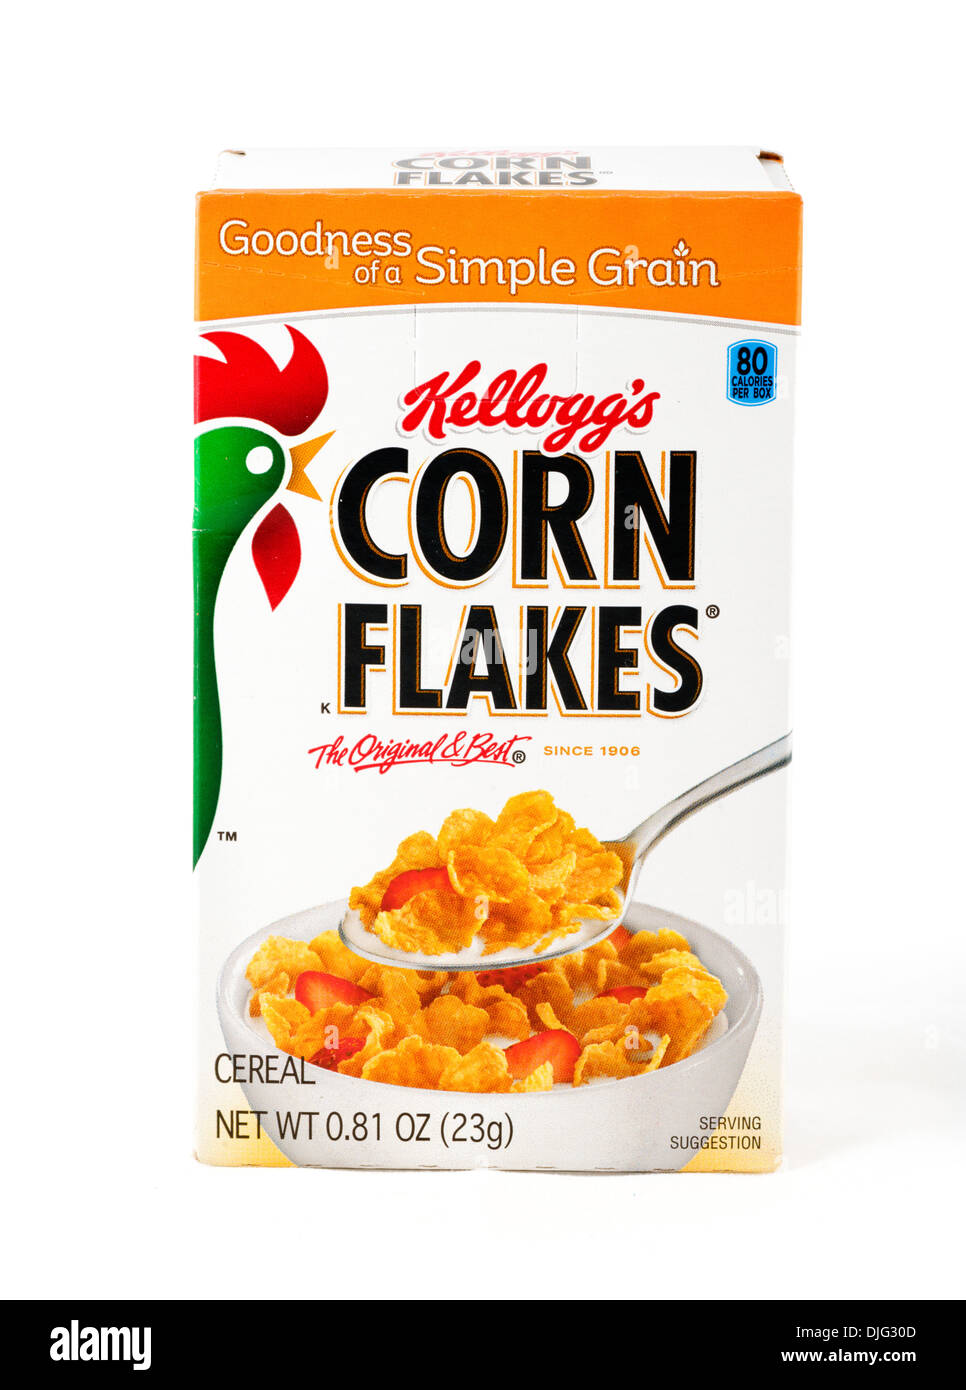 Small packet of Kellogg's Corn Flakes breakfast cereal from a Variety Pack, USA Stock Photo